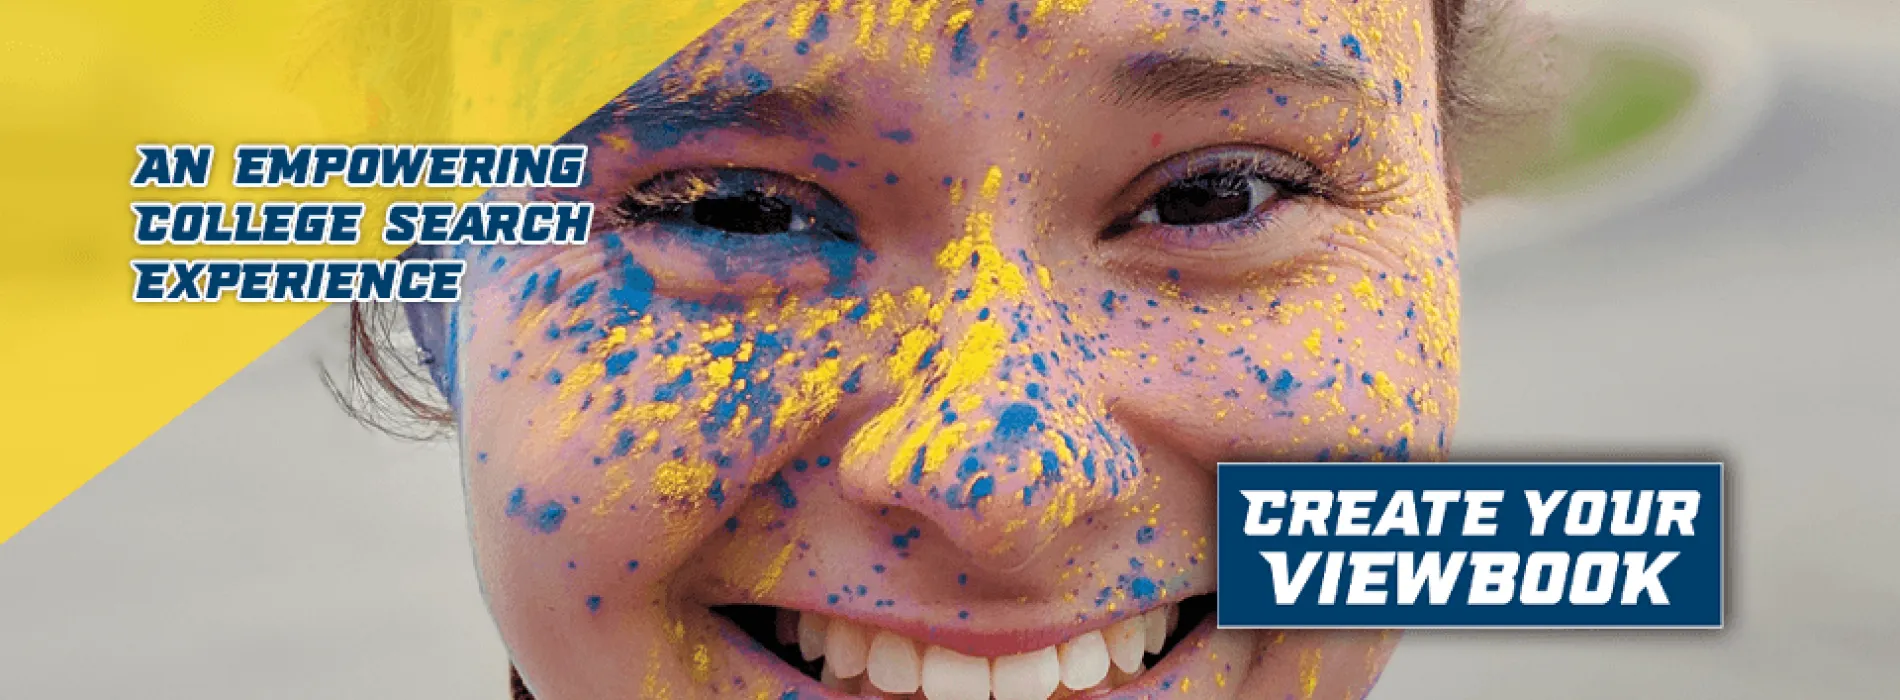 Link to custom viewbook. Image of smiling student with blue and gold dust close up. Text reads: An empowering college search experience. Create your viewbook.